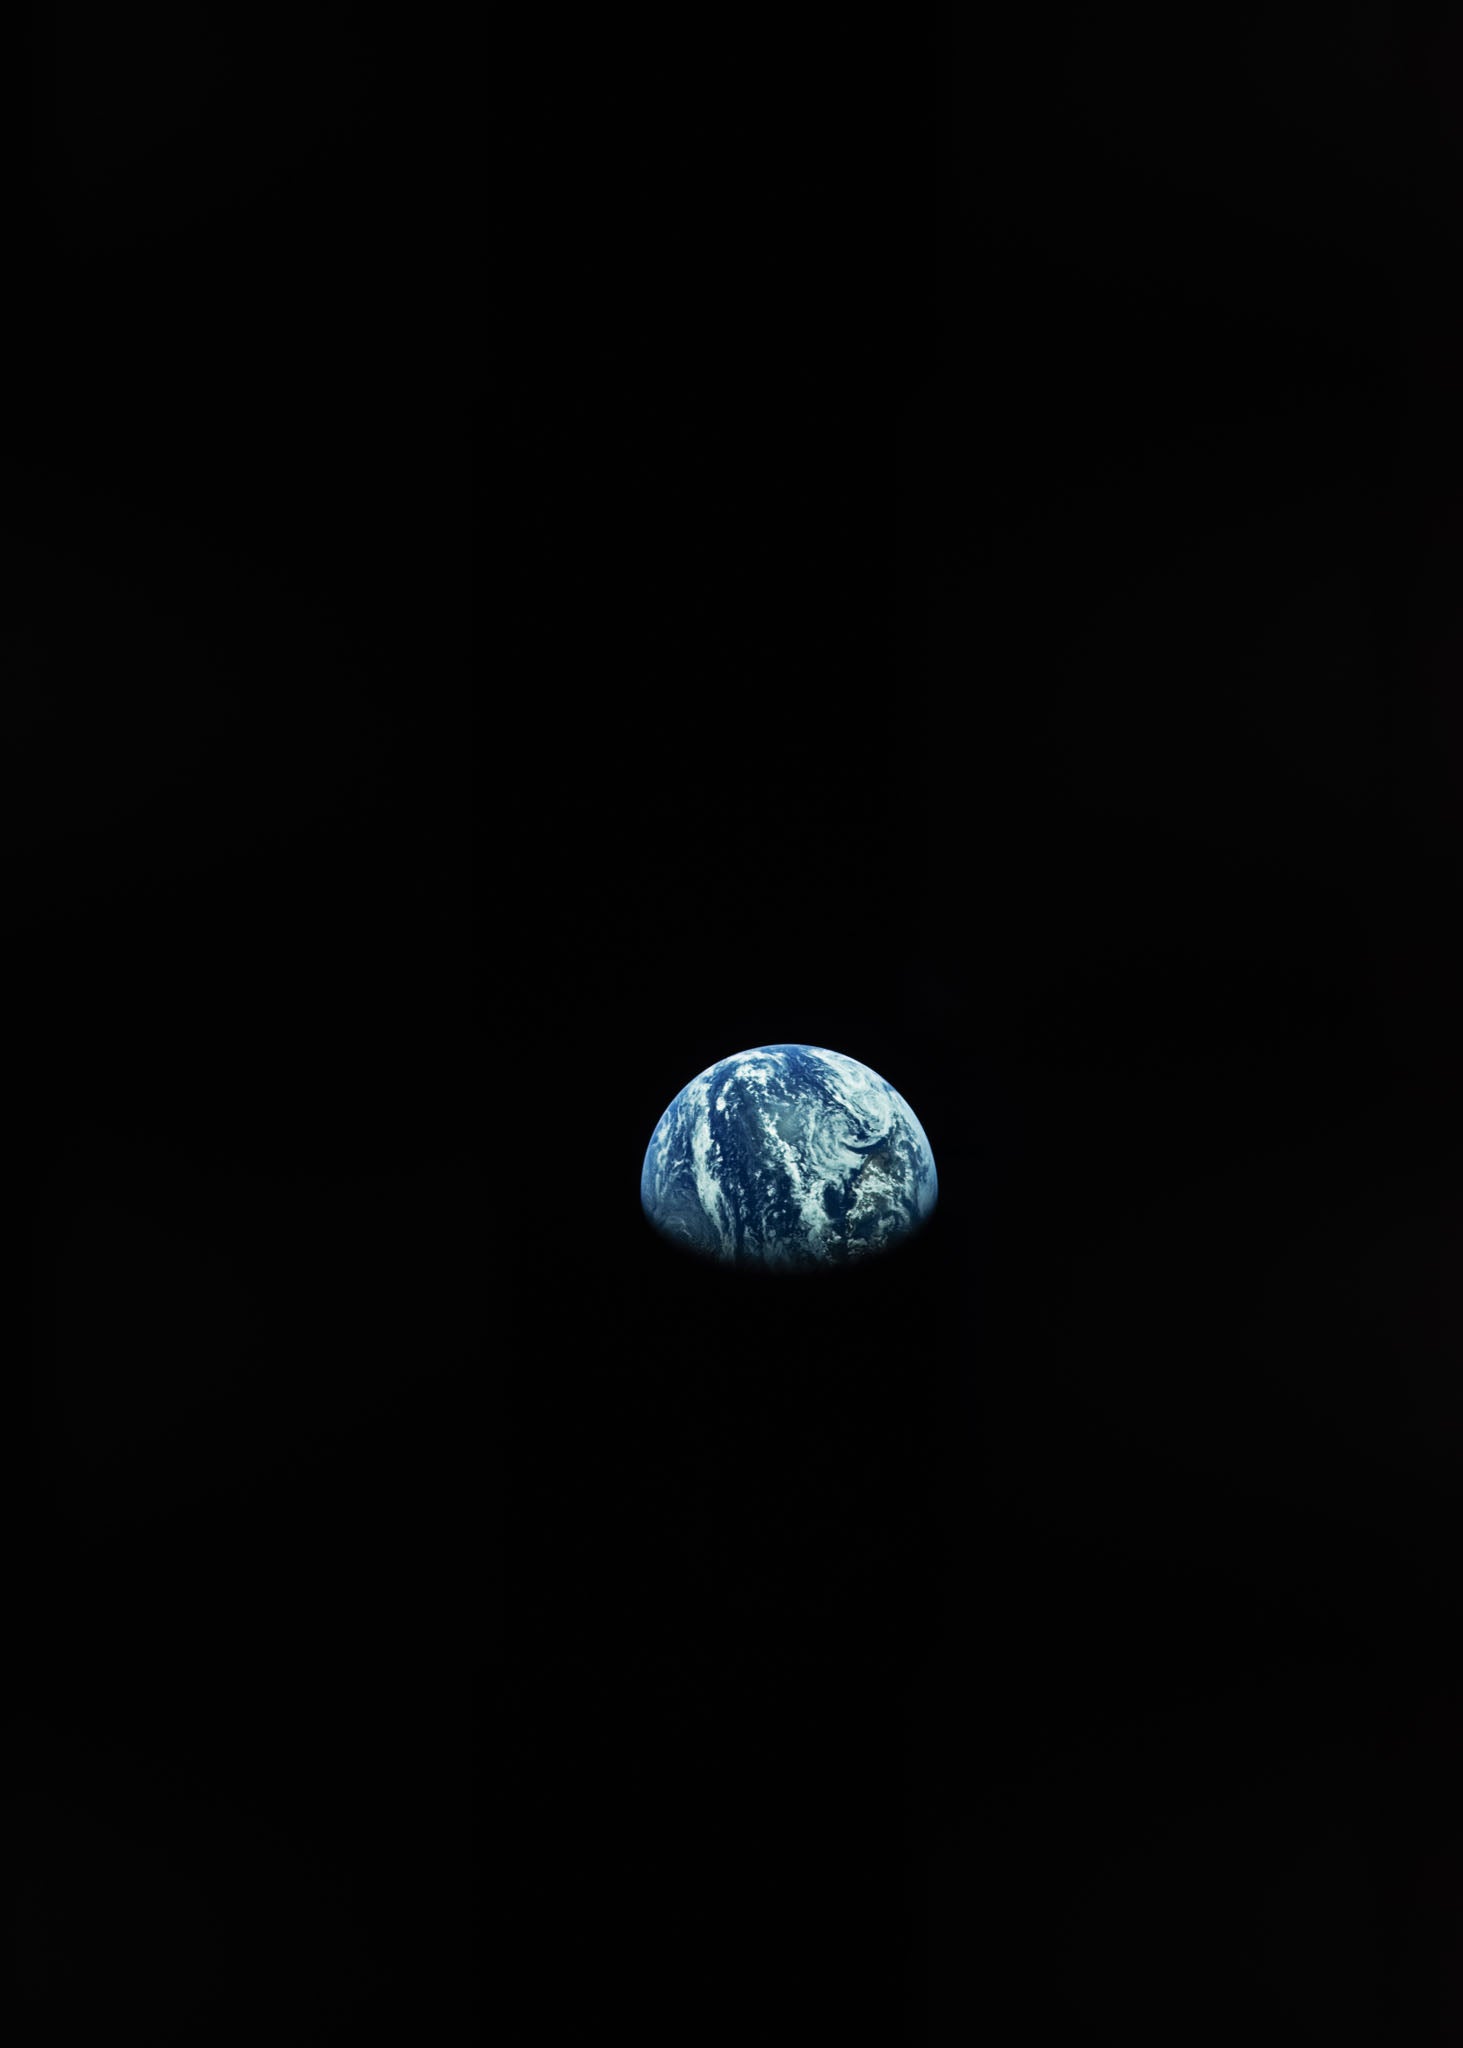 The Earth, the home